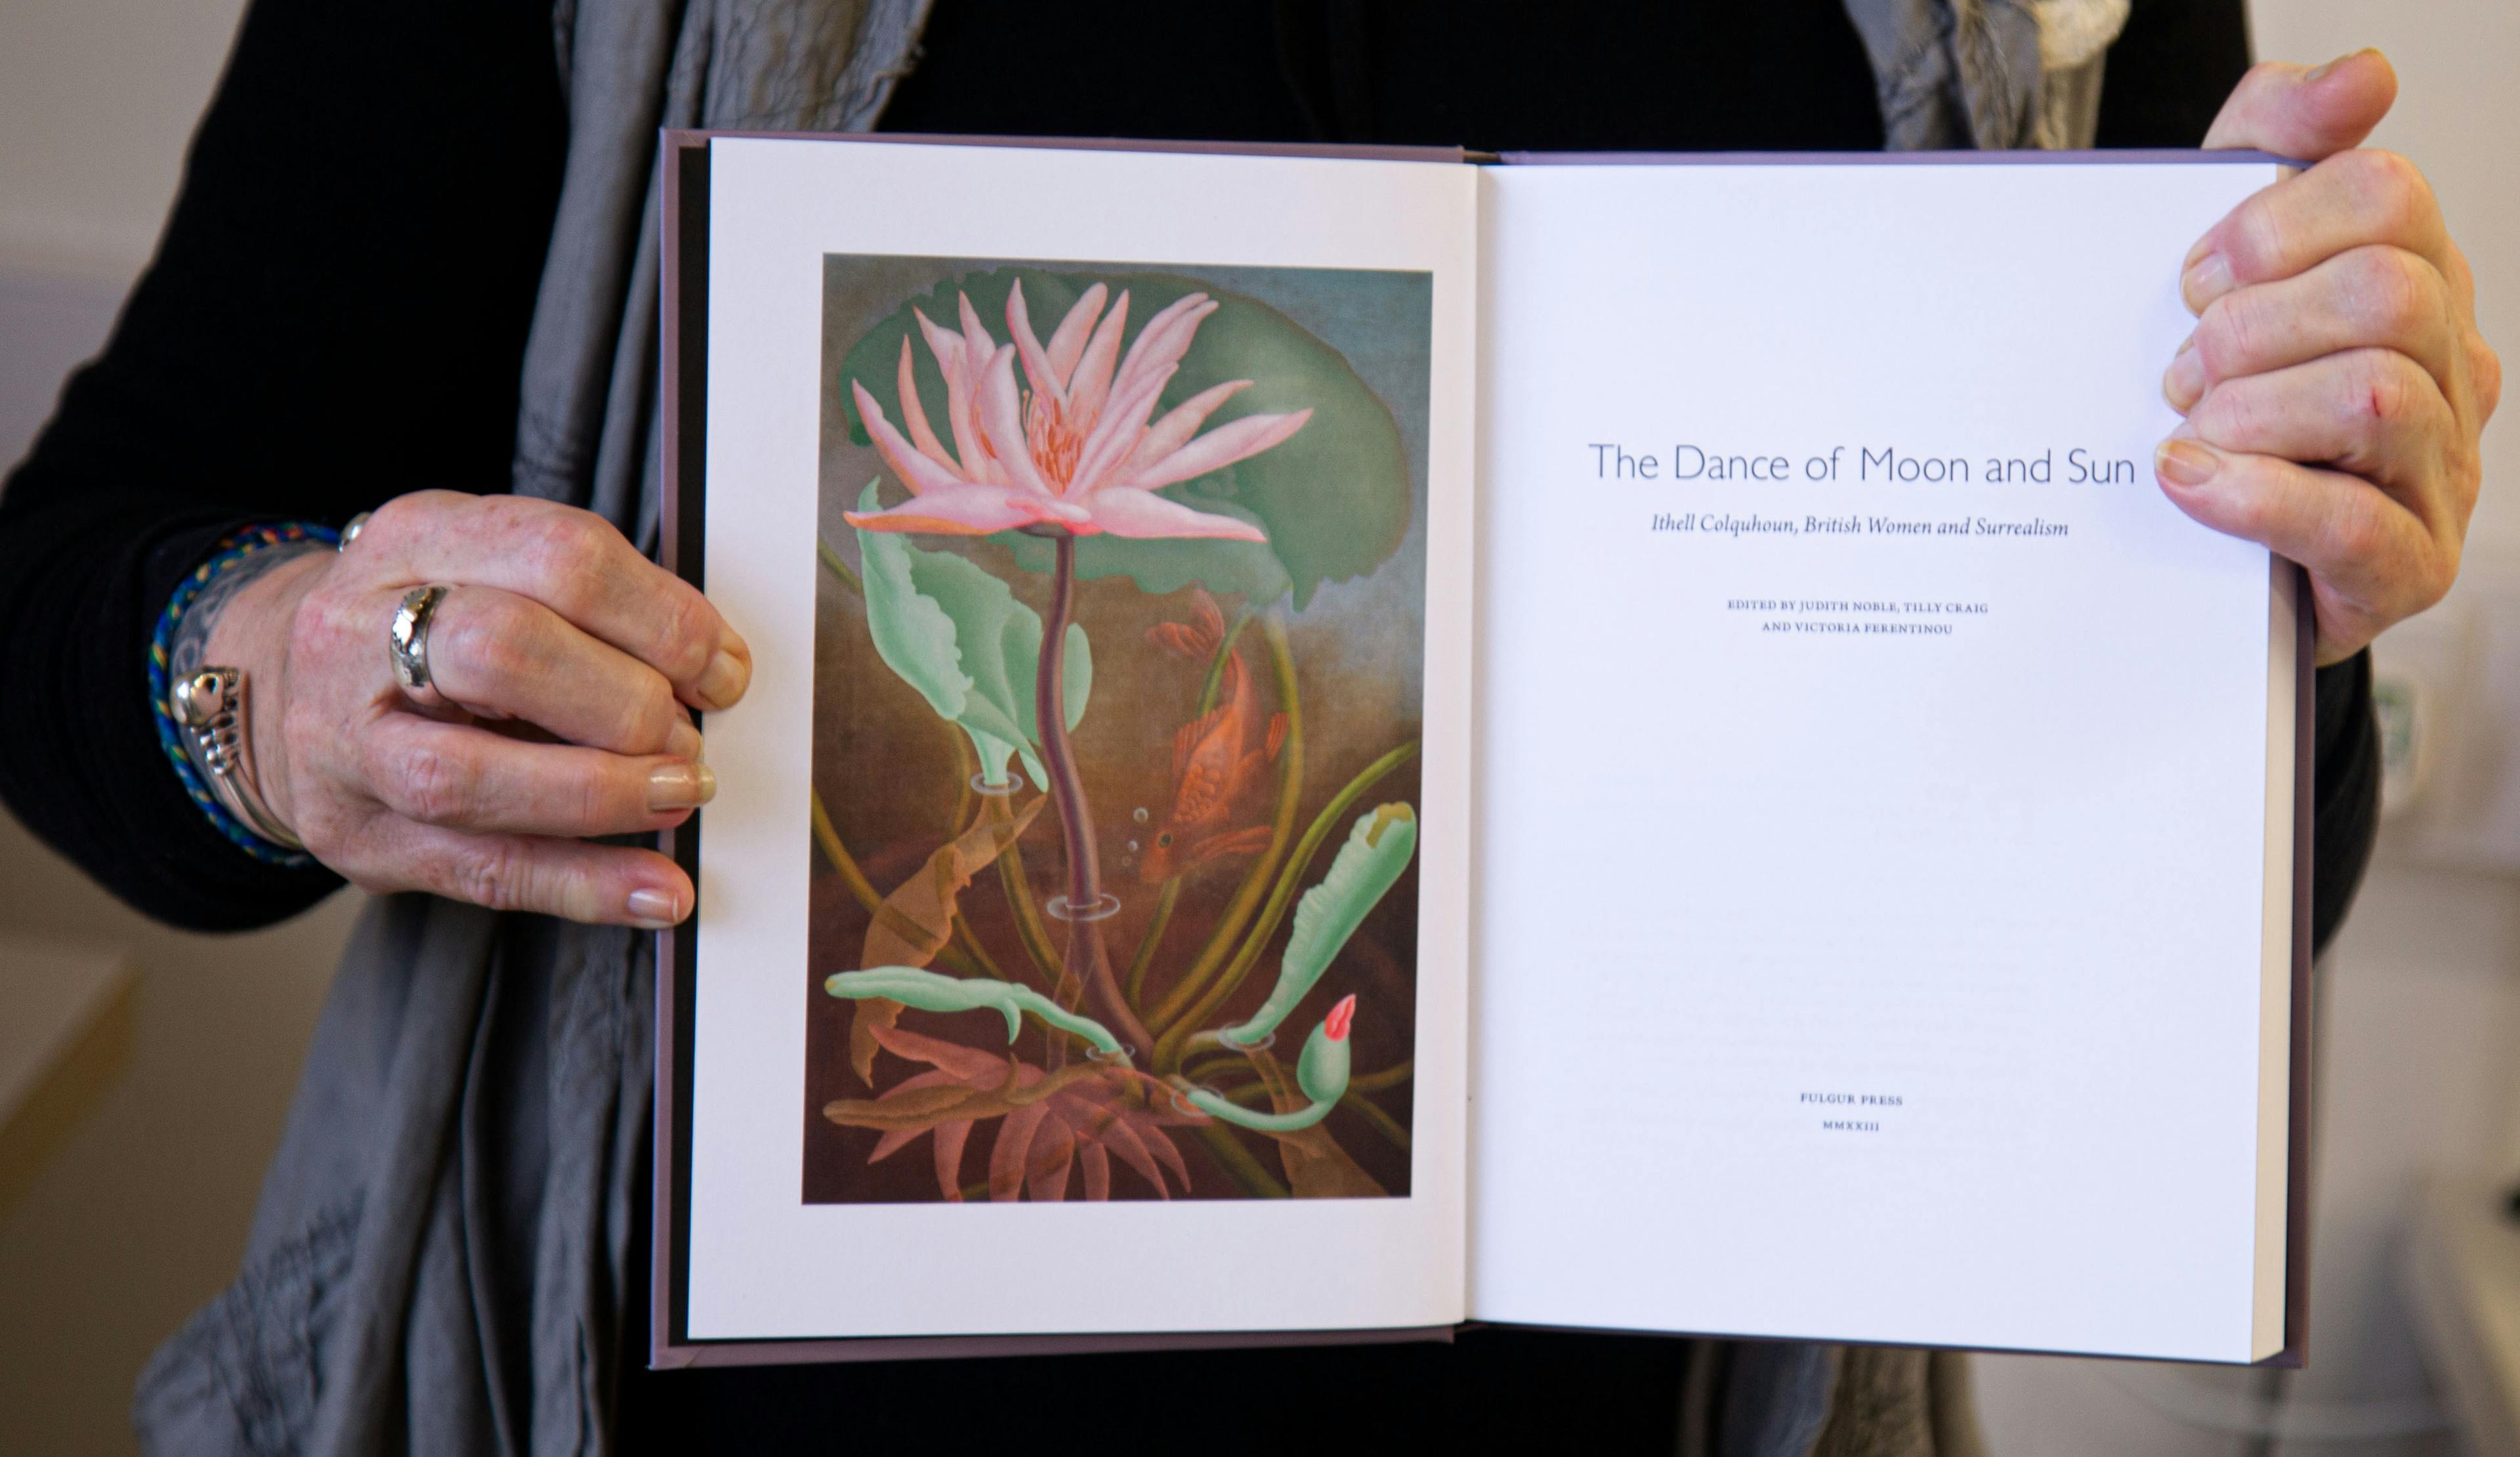 Judith Noble holding copy of The Dance of Moon and Sun